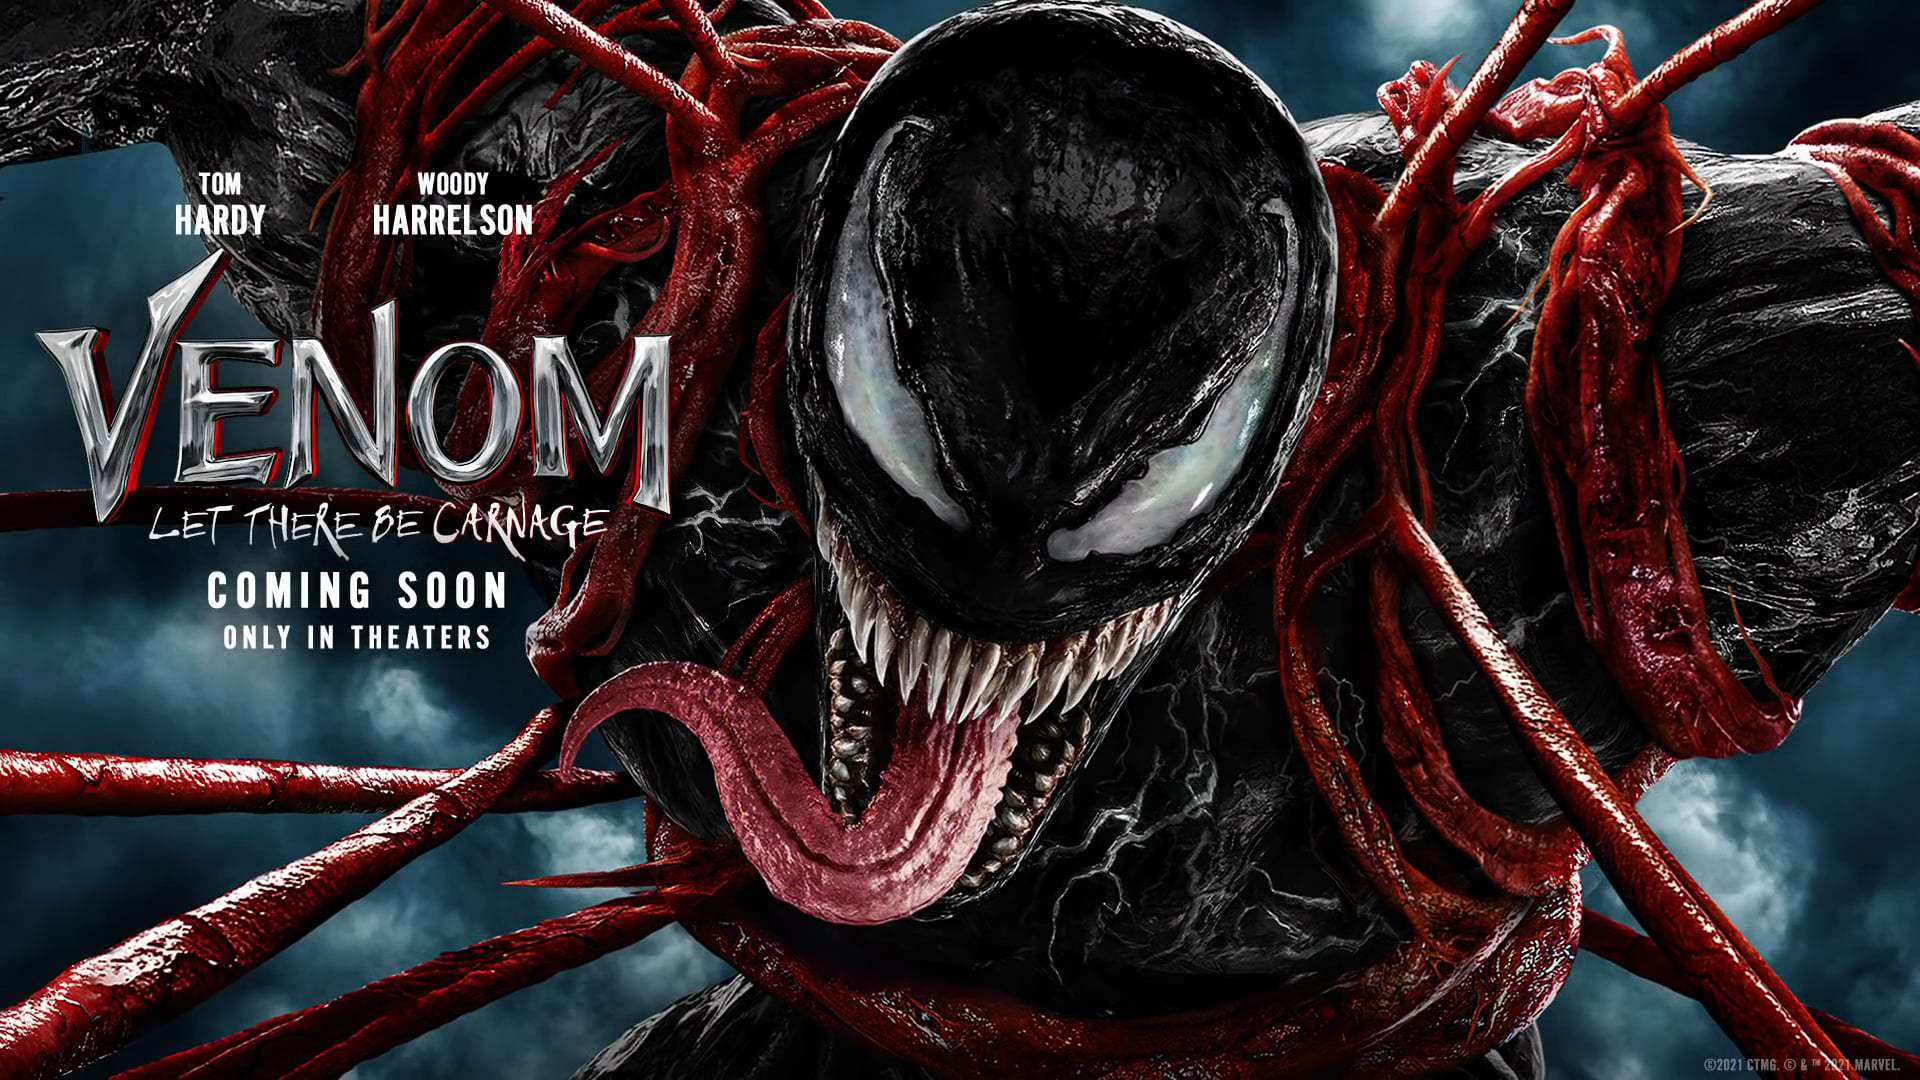 Venom Let There Be Carnage Trailer (2021)